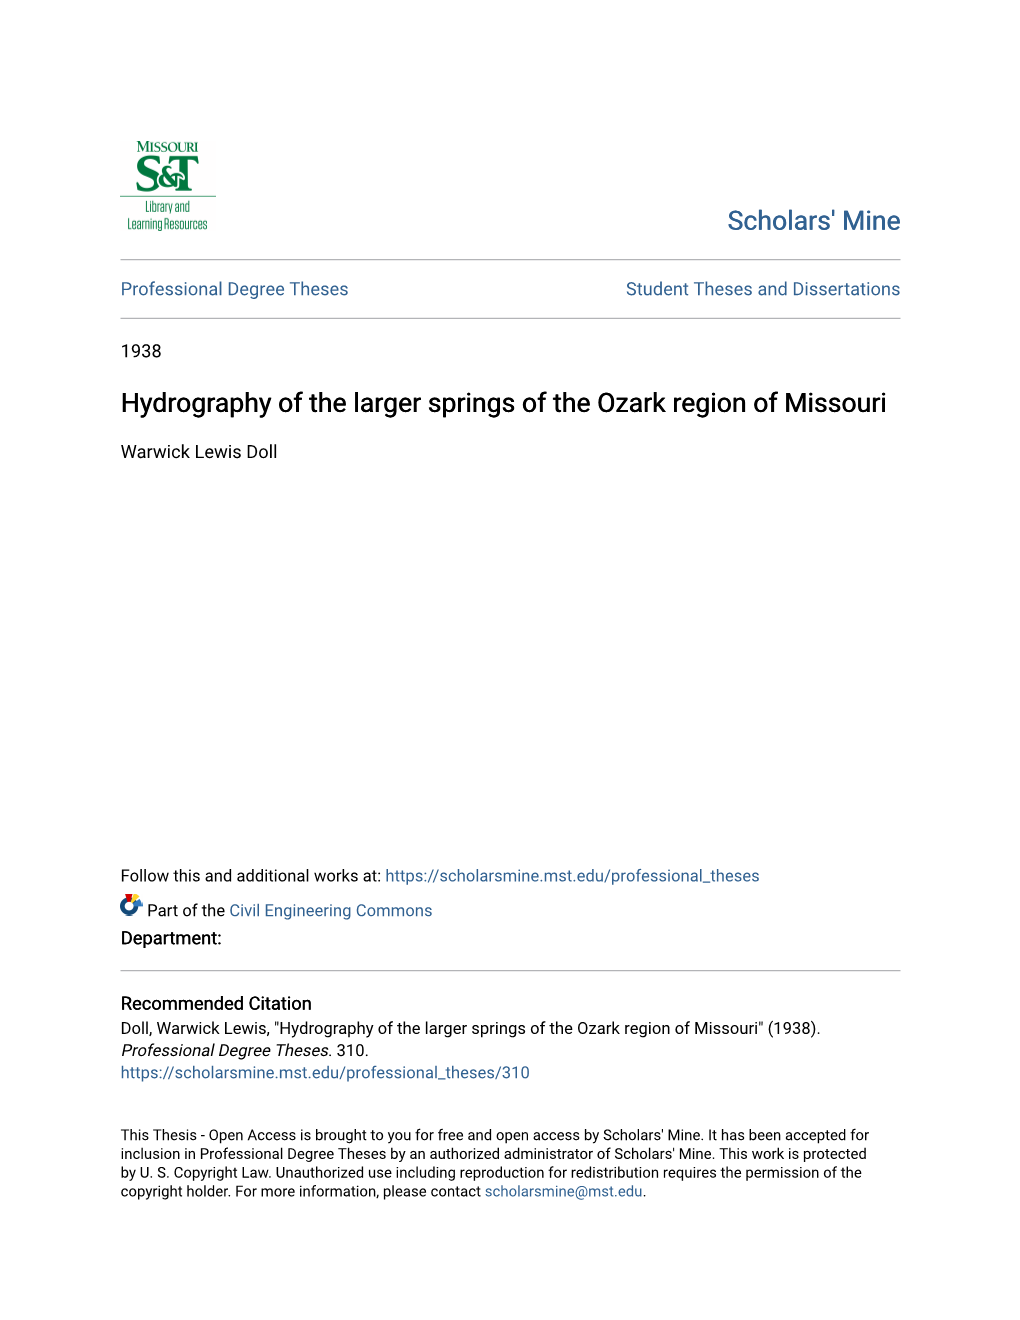 Hydrography of the Larger Springs of the Ozark Region of Missouri